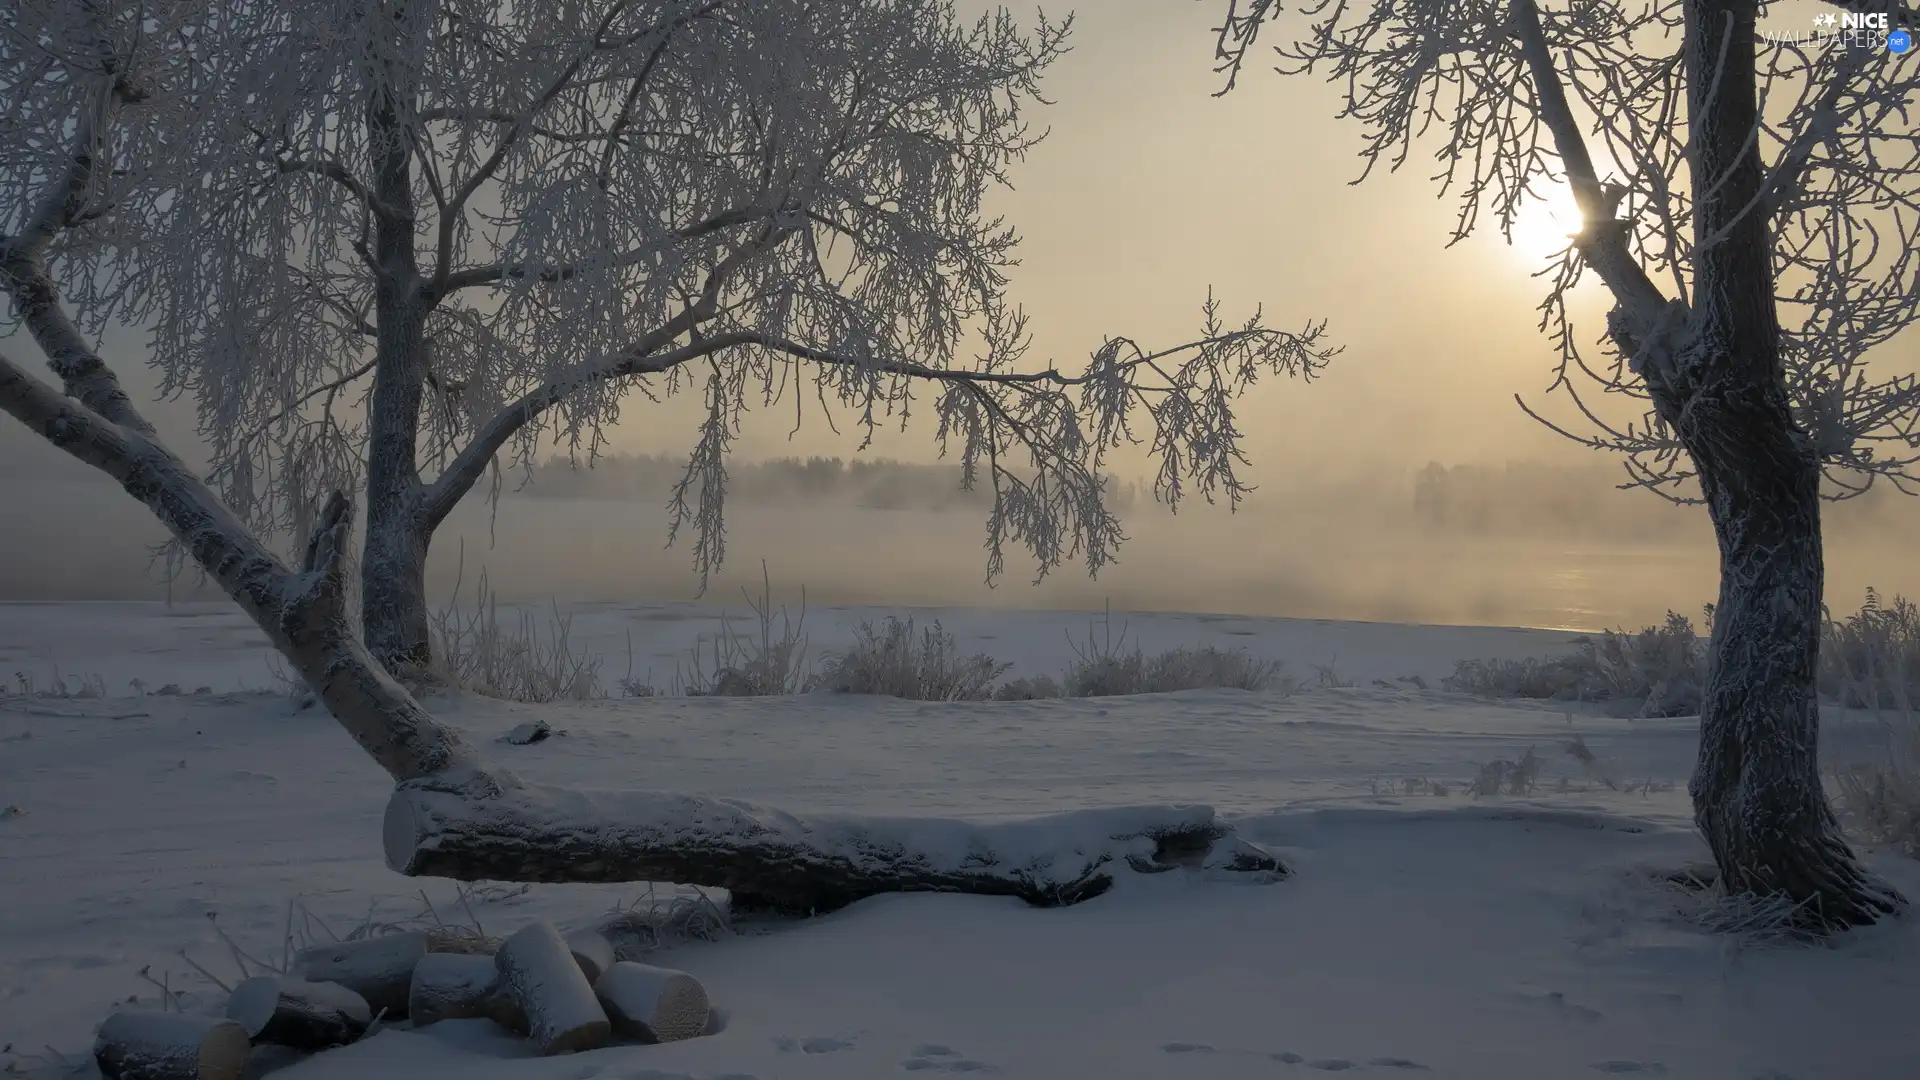 River, frosty, log, trees, laying, Fog, winter, viewes